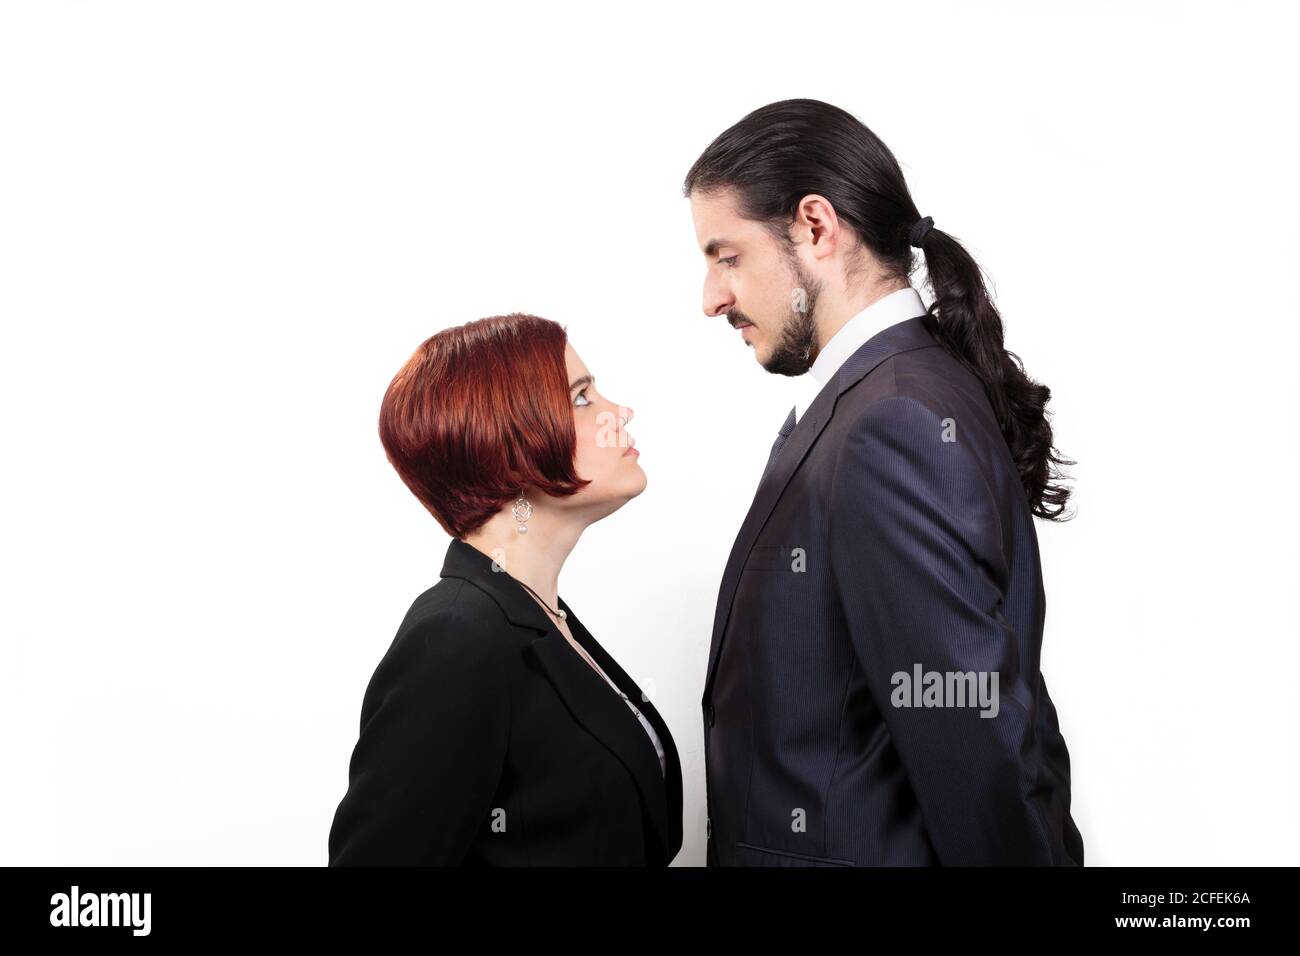 Stand off between a male and female partner Stock Photo